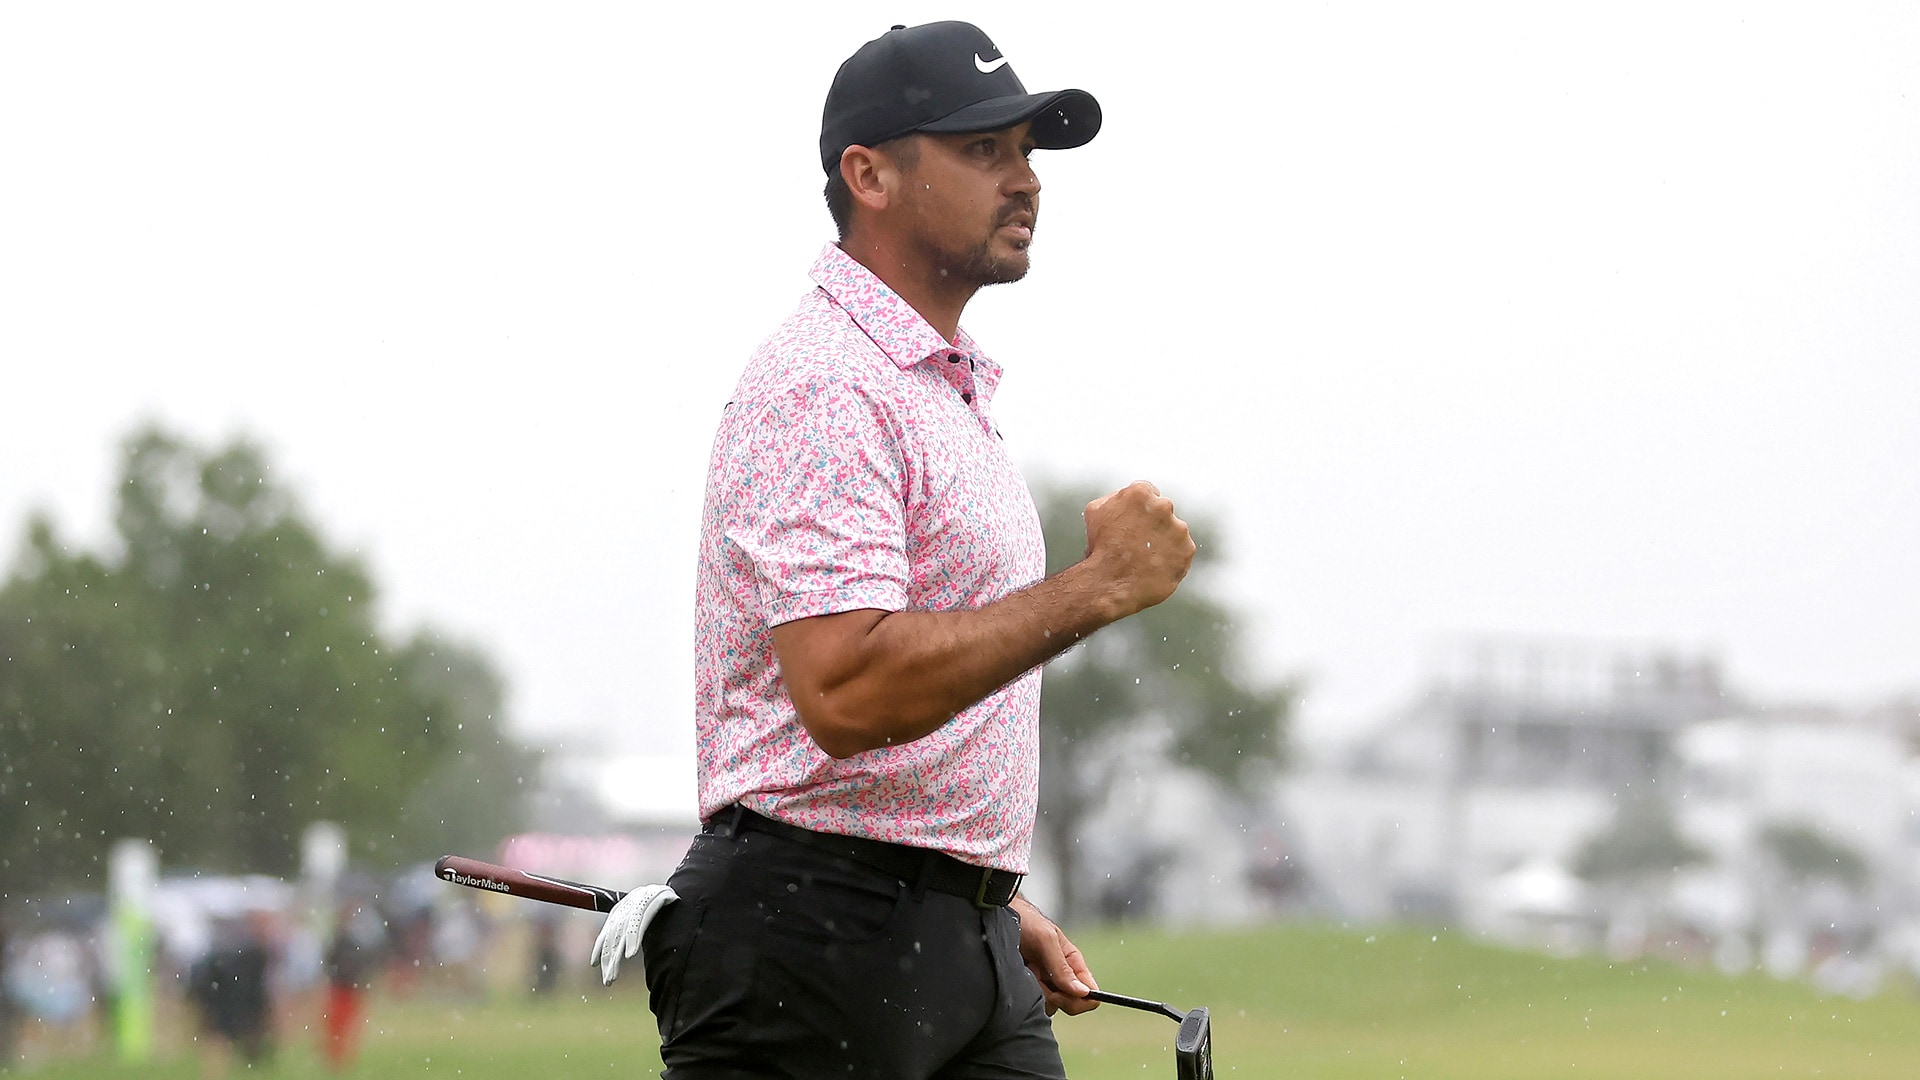 At the AT&T Byron Nelson, Jason Day a PGA Tour champion once again after being ‘close to calling it quits’